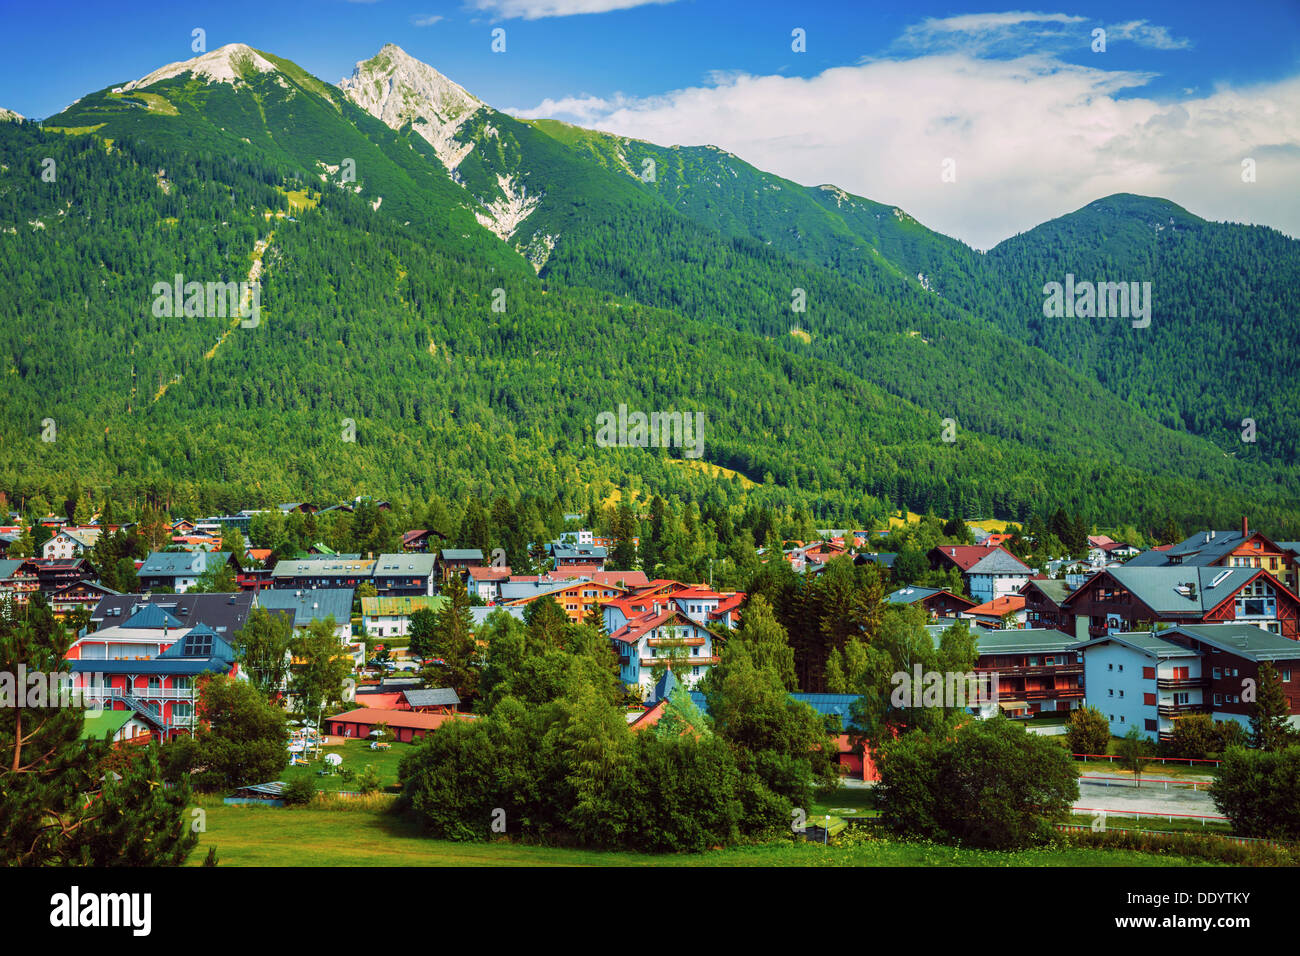 Little beautiful city in the mountains, Europe, Austria, Seefeld, Alps, famous ski resort, luxury cottages, touristic place Stock Photo